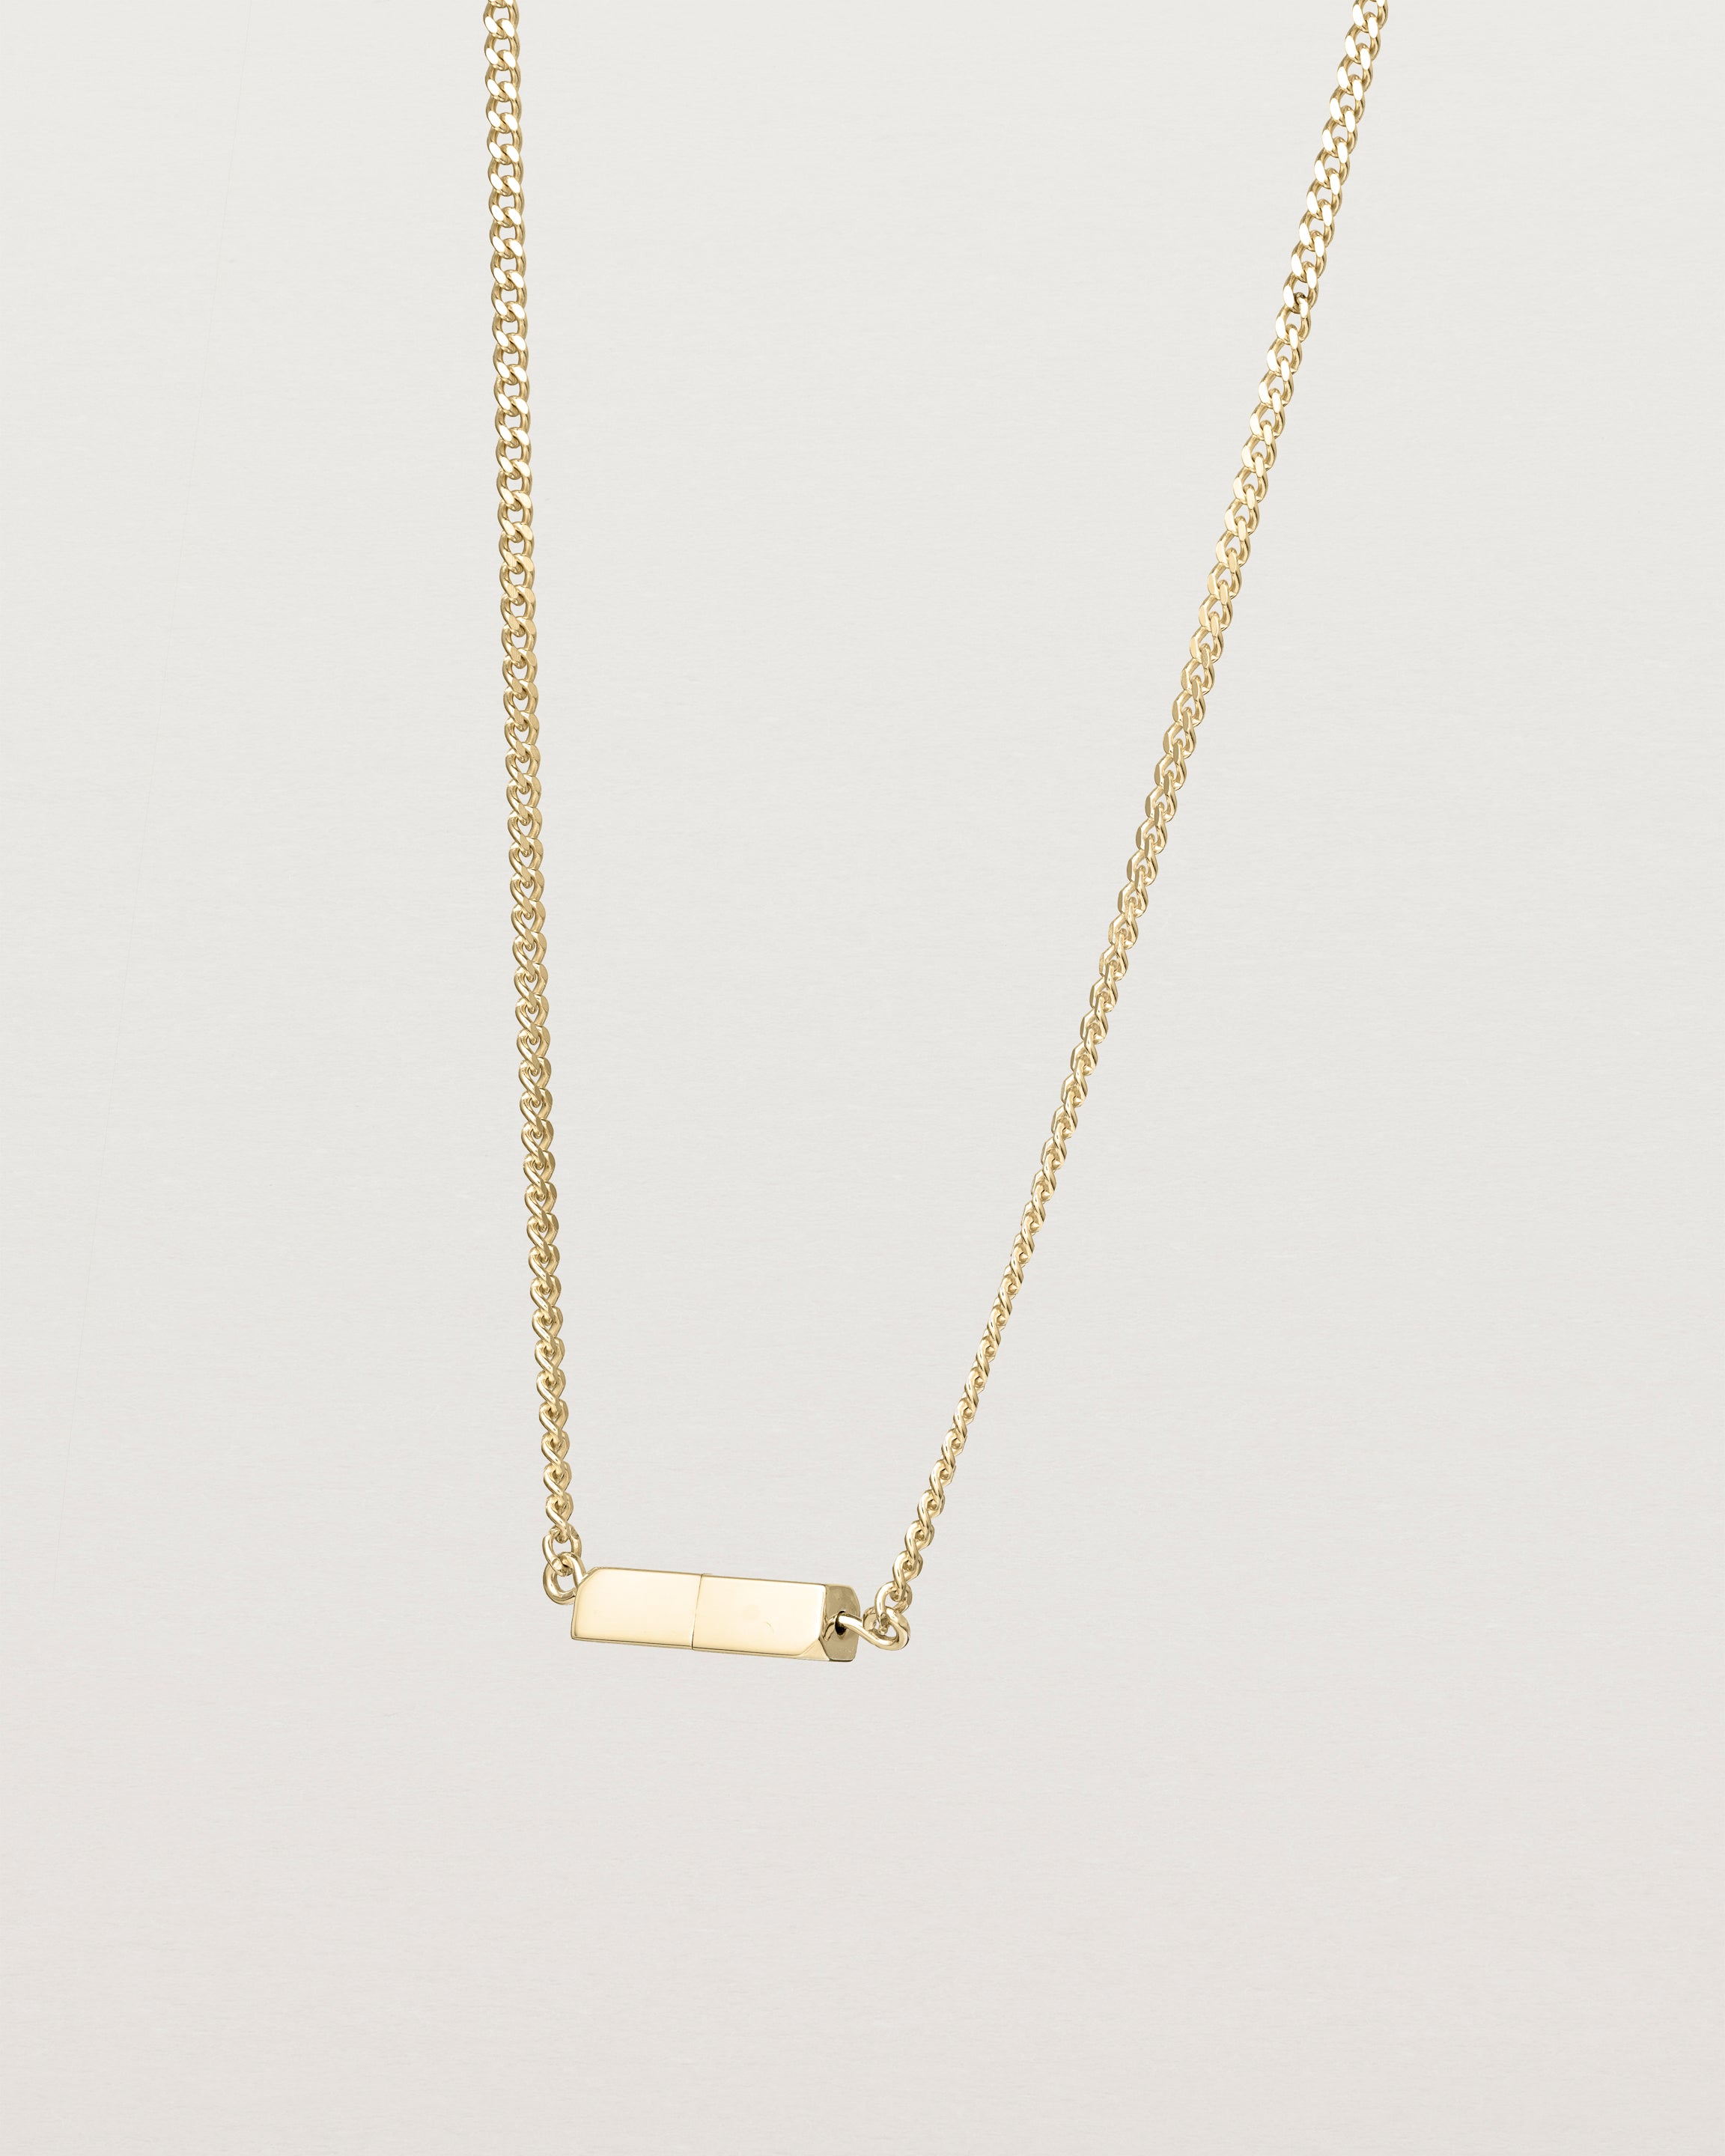 Angled view of the Guardian Chain in yellow gold.